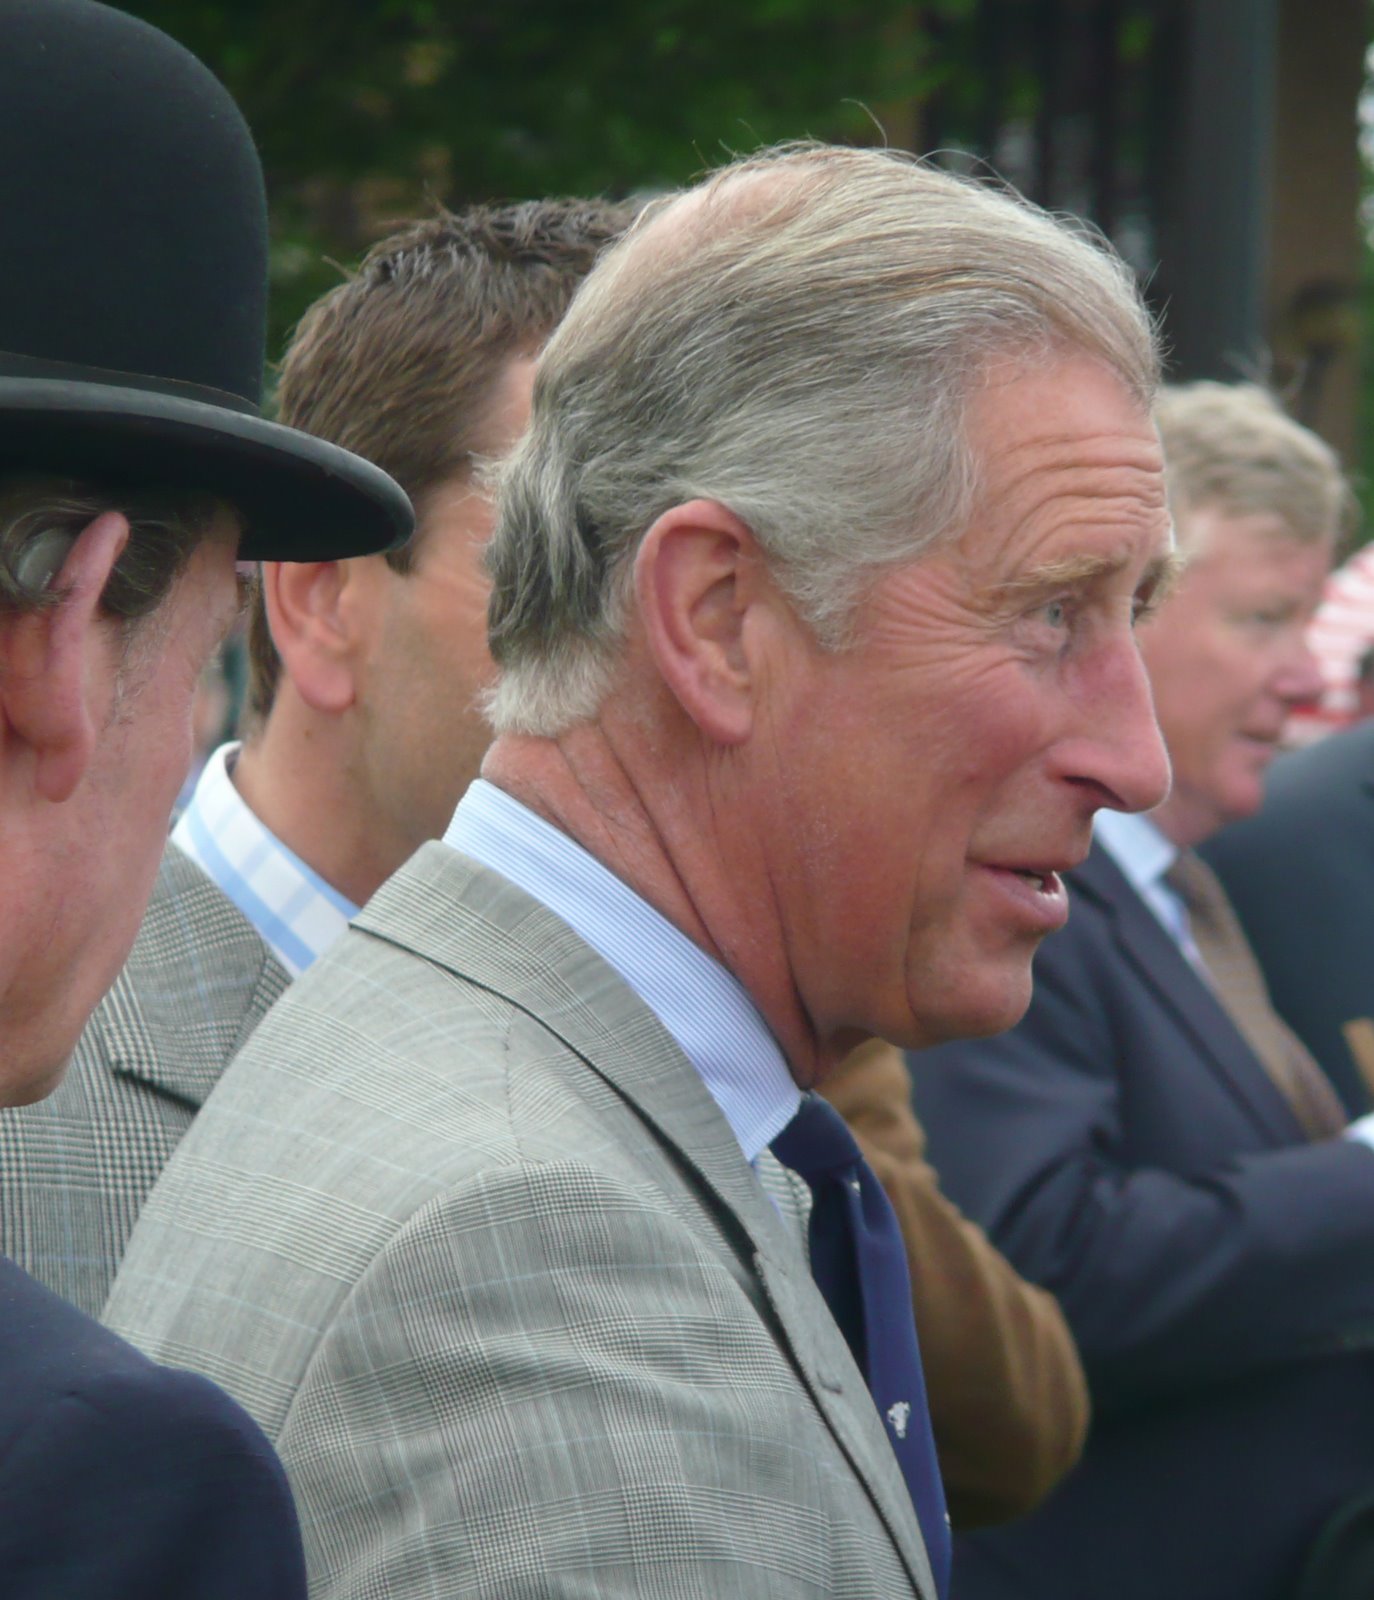 [Prince+Charles+in+more+good+humour..jpg]